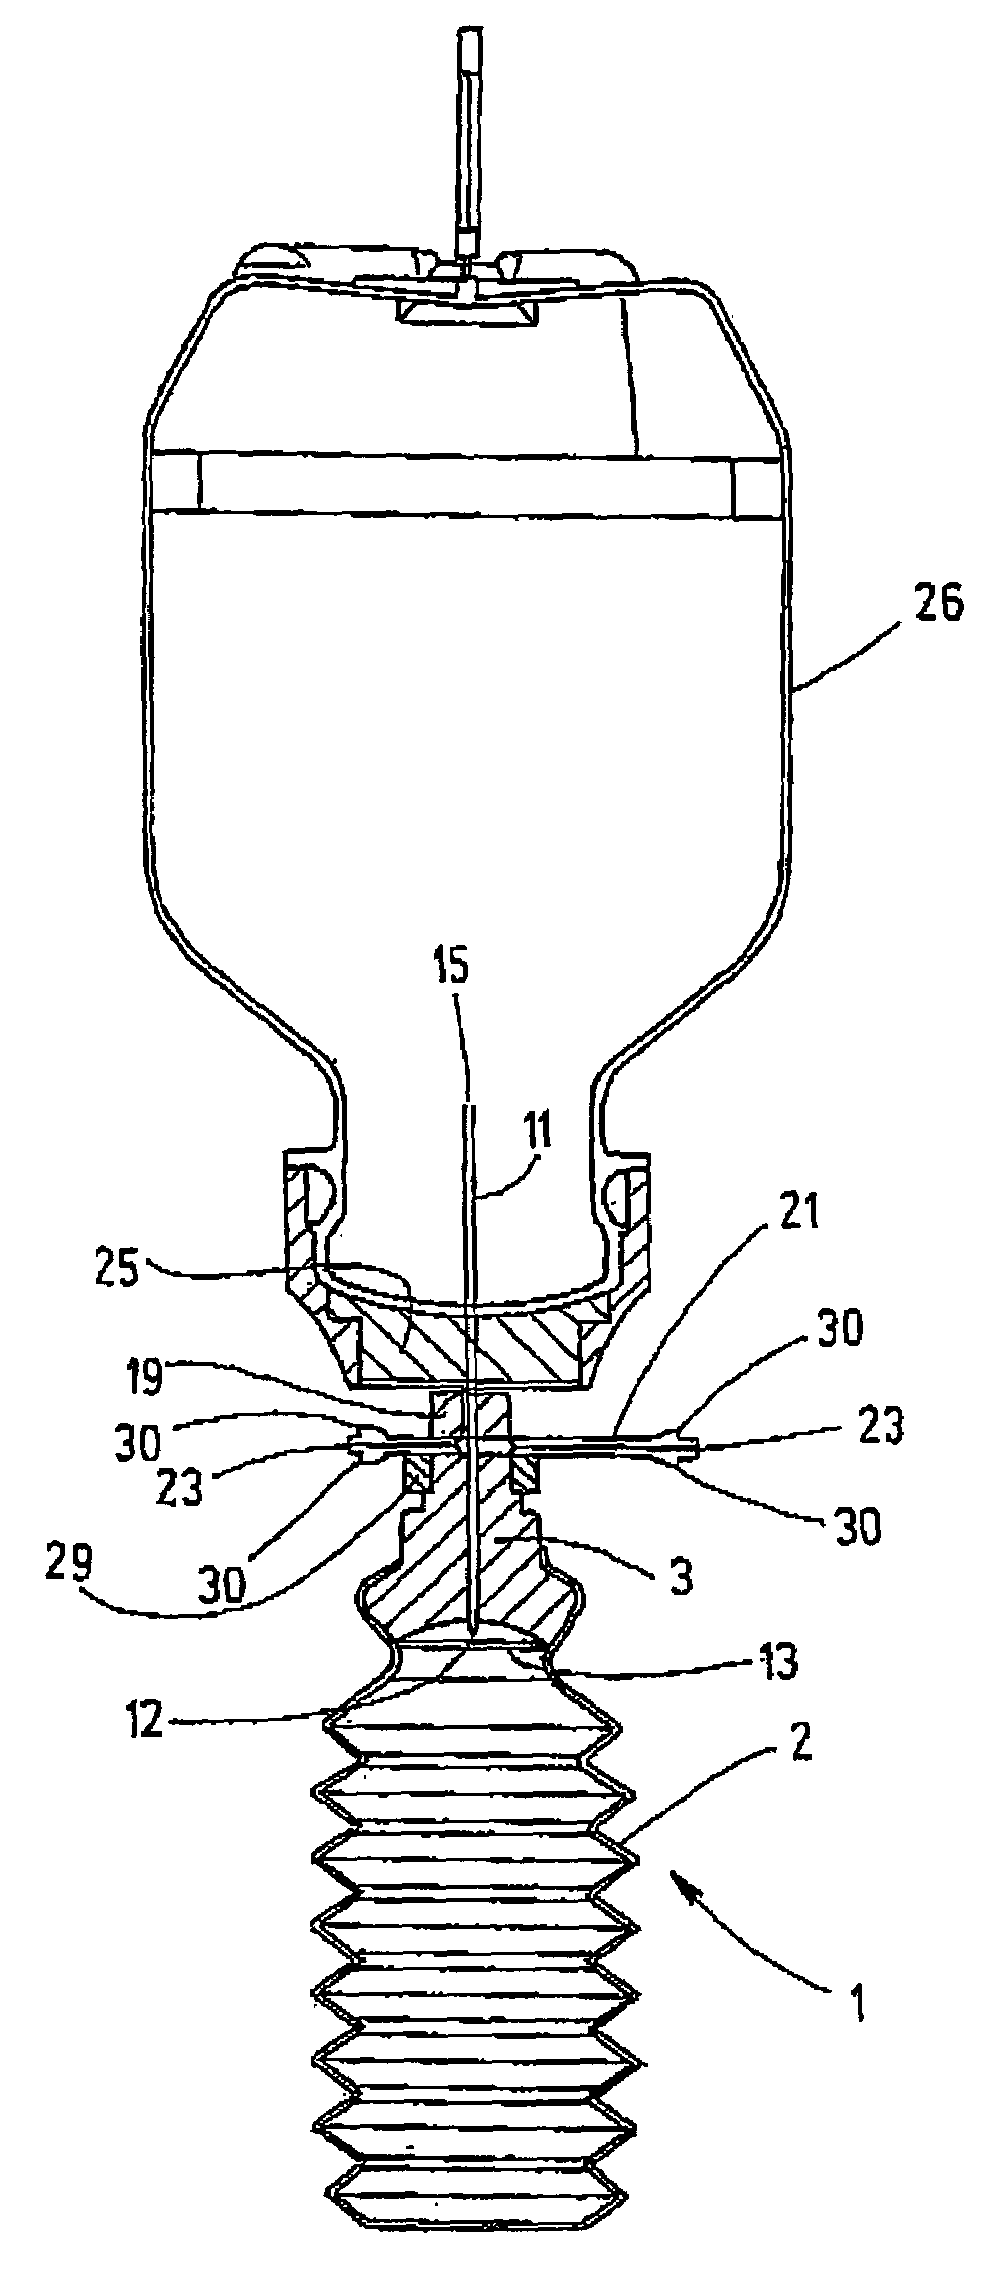 Device for distributing substances